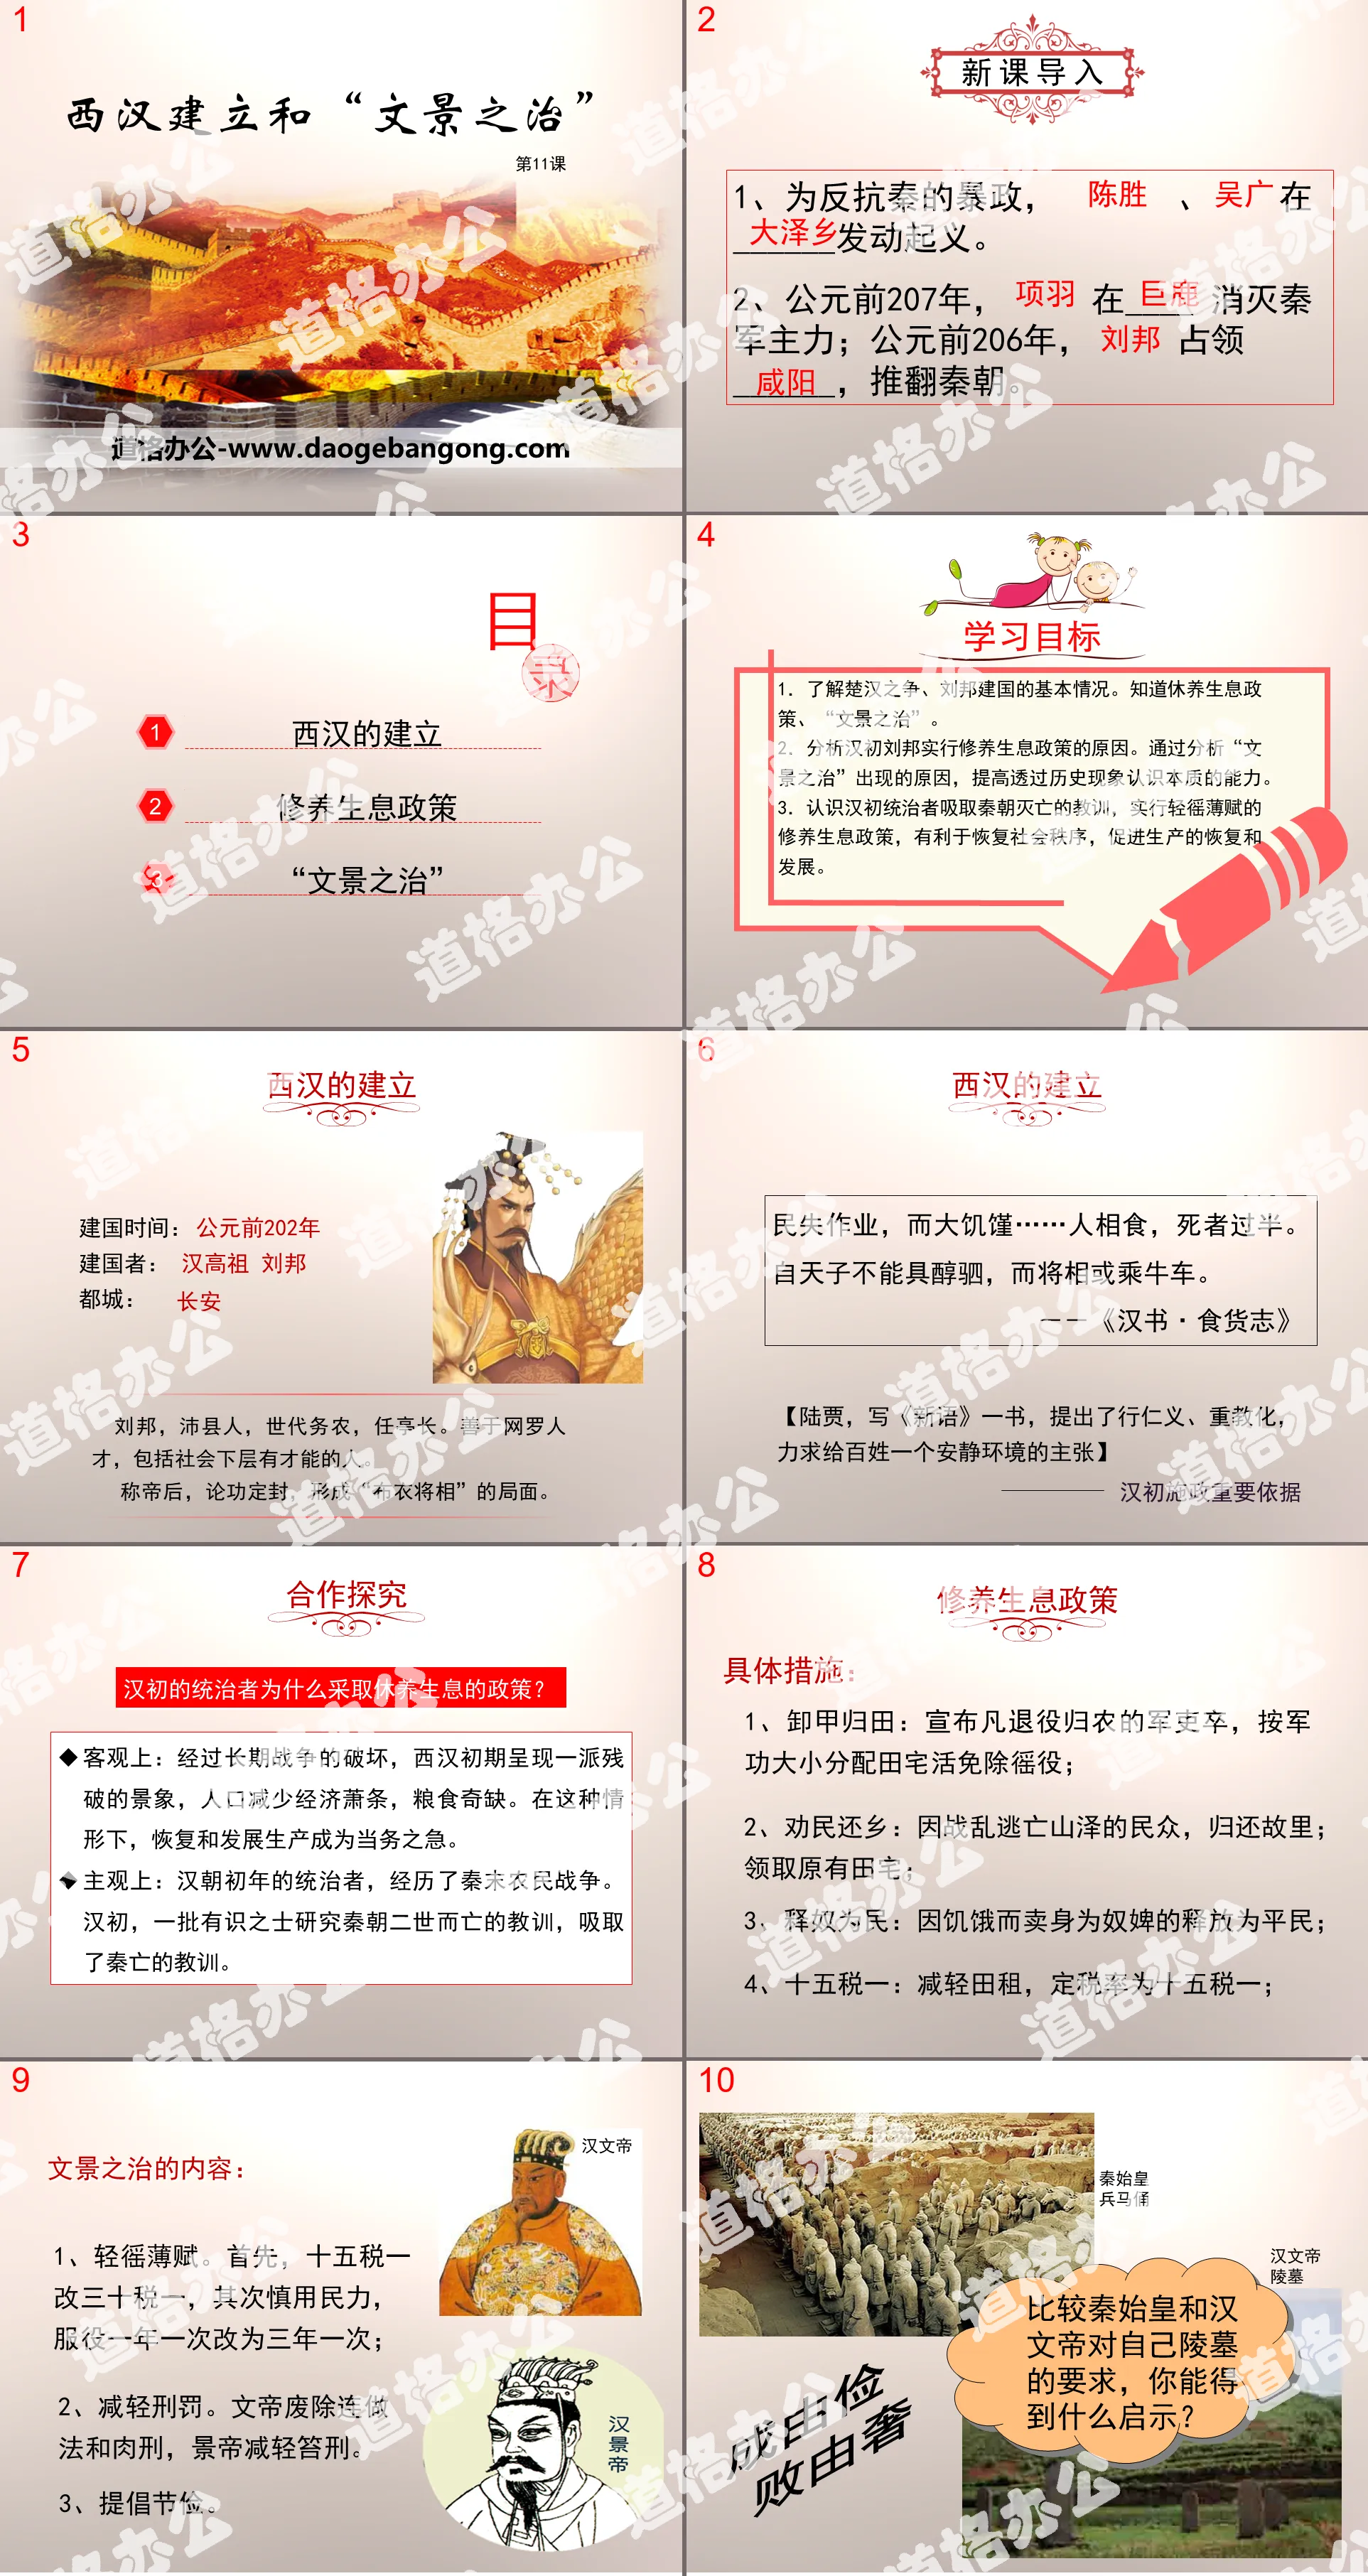 "The Establishment of the Western Han Dynasty and the "Government of Wenjing"" PPT